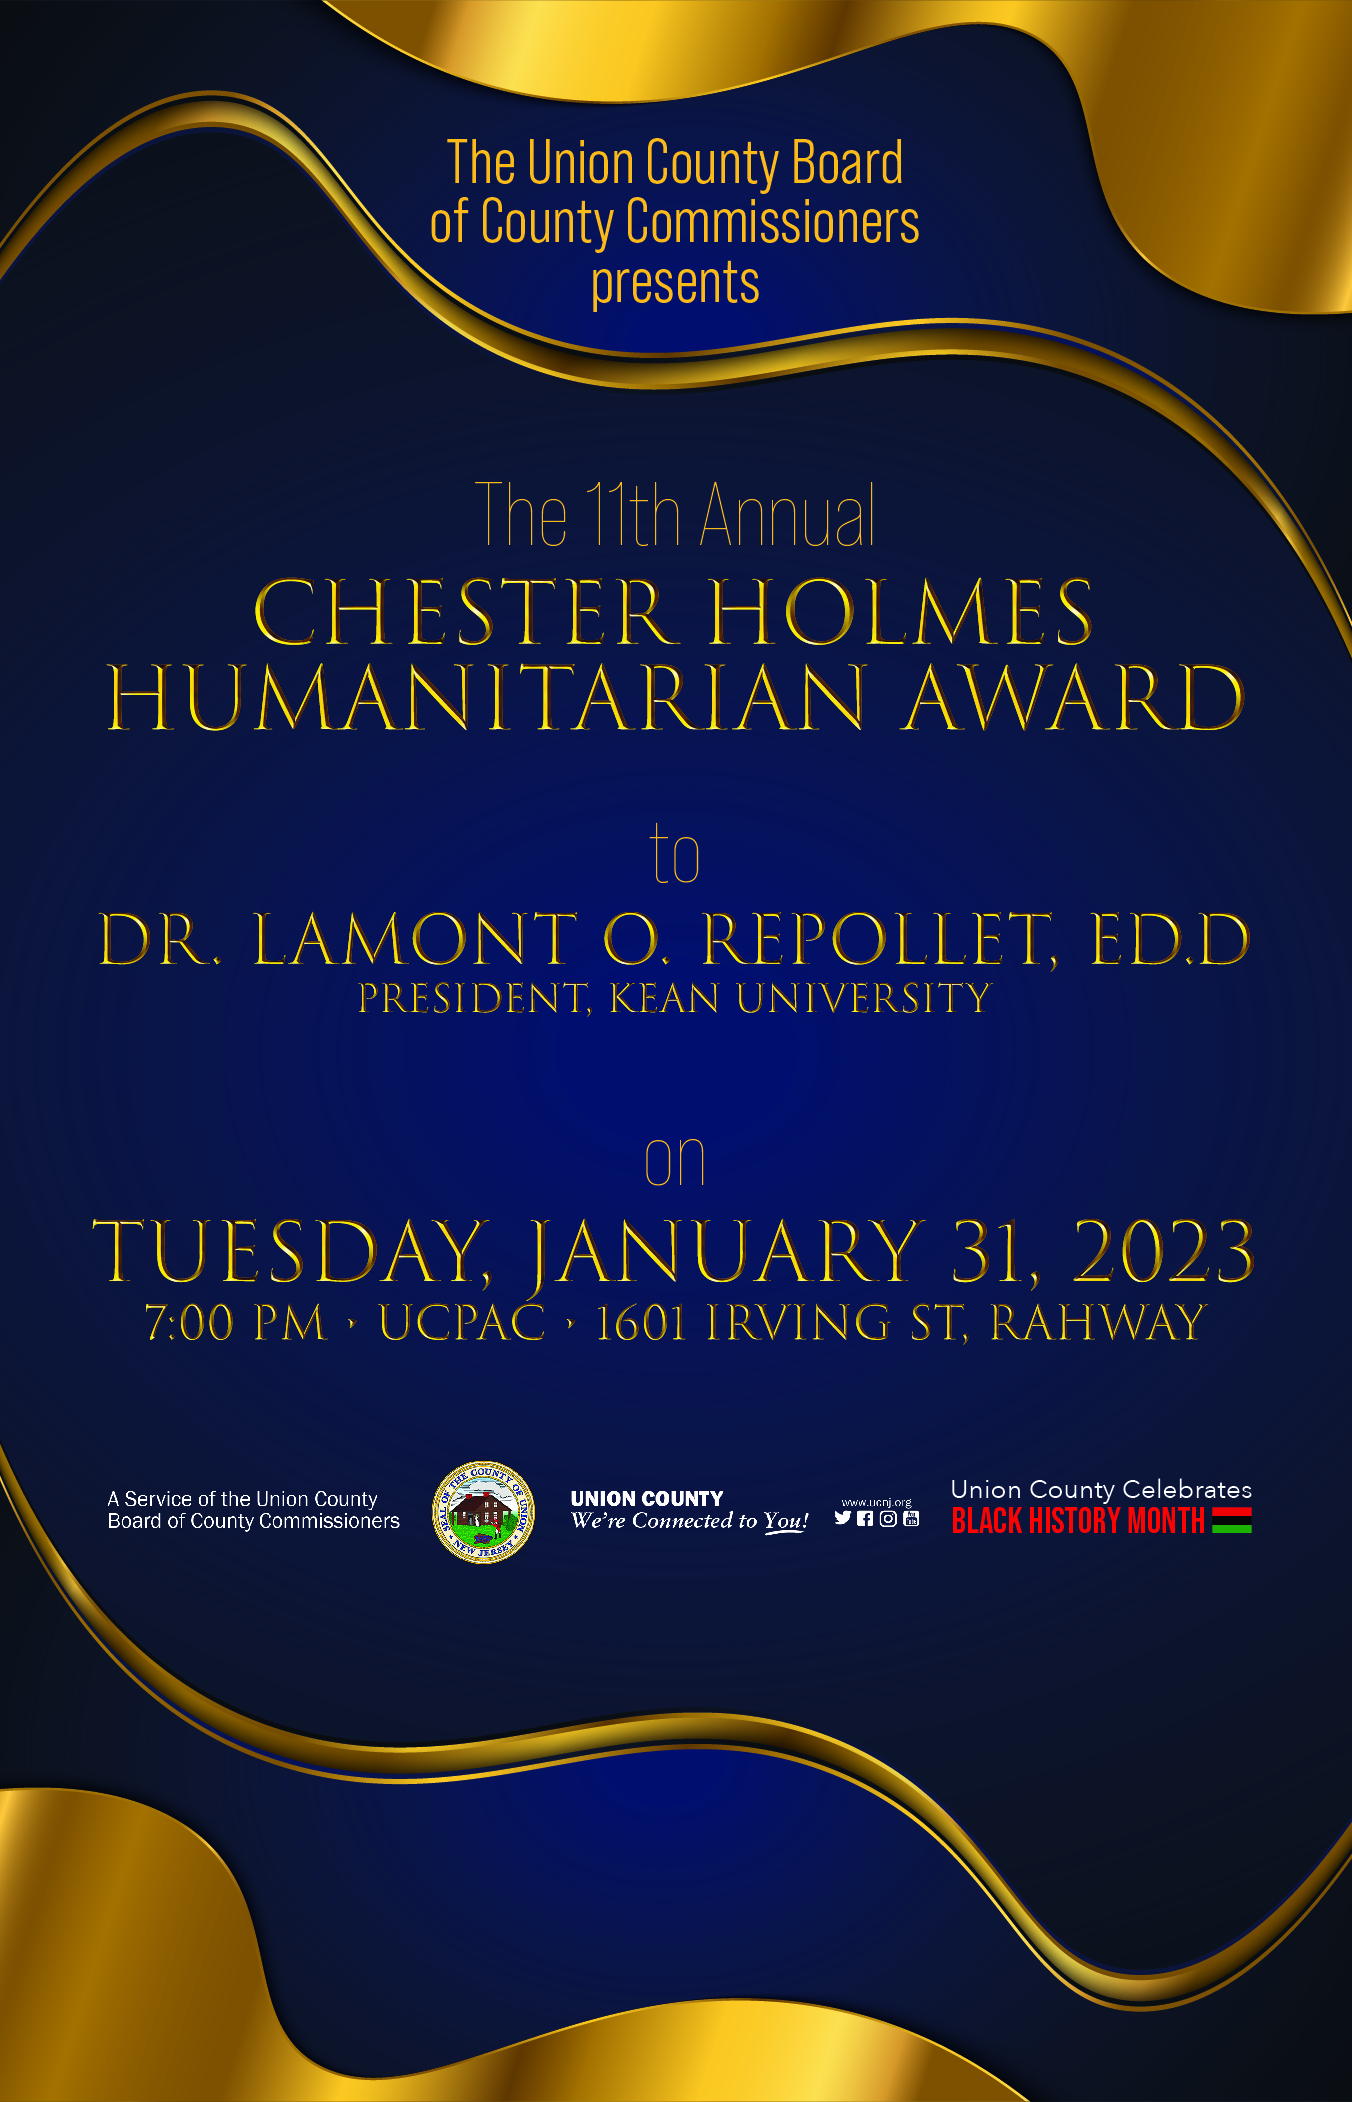 Dr. Lamont O. Repollet, Ed. D. to Receive 2023 Chester Holmes Humanitarian Award